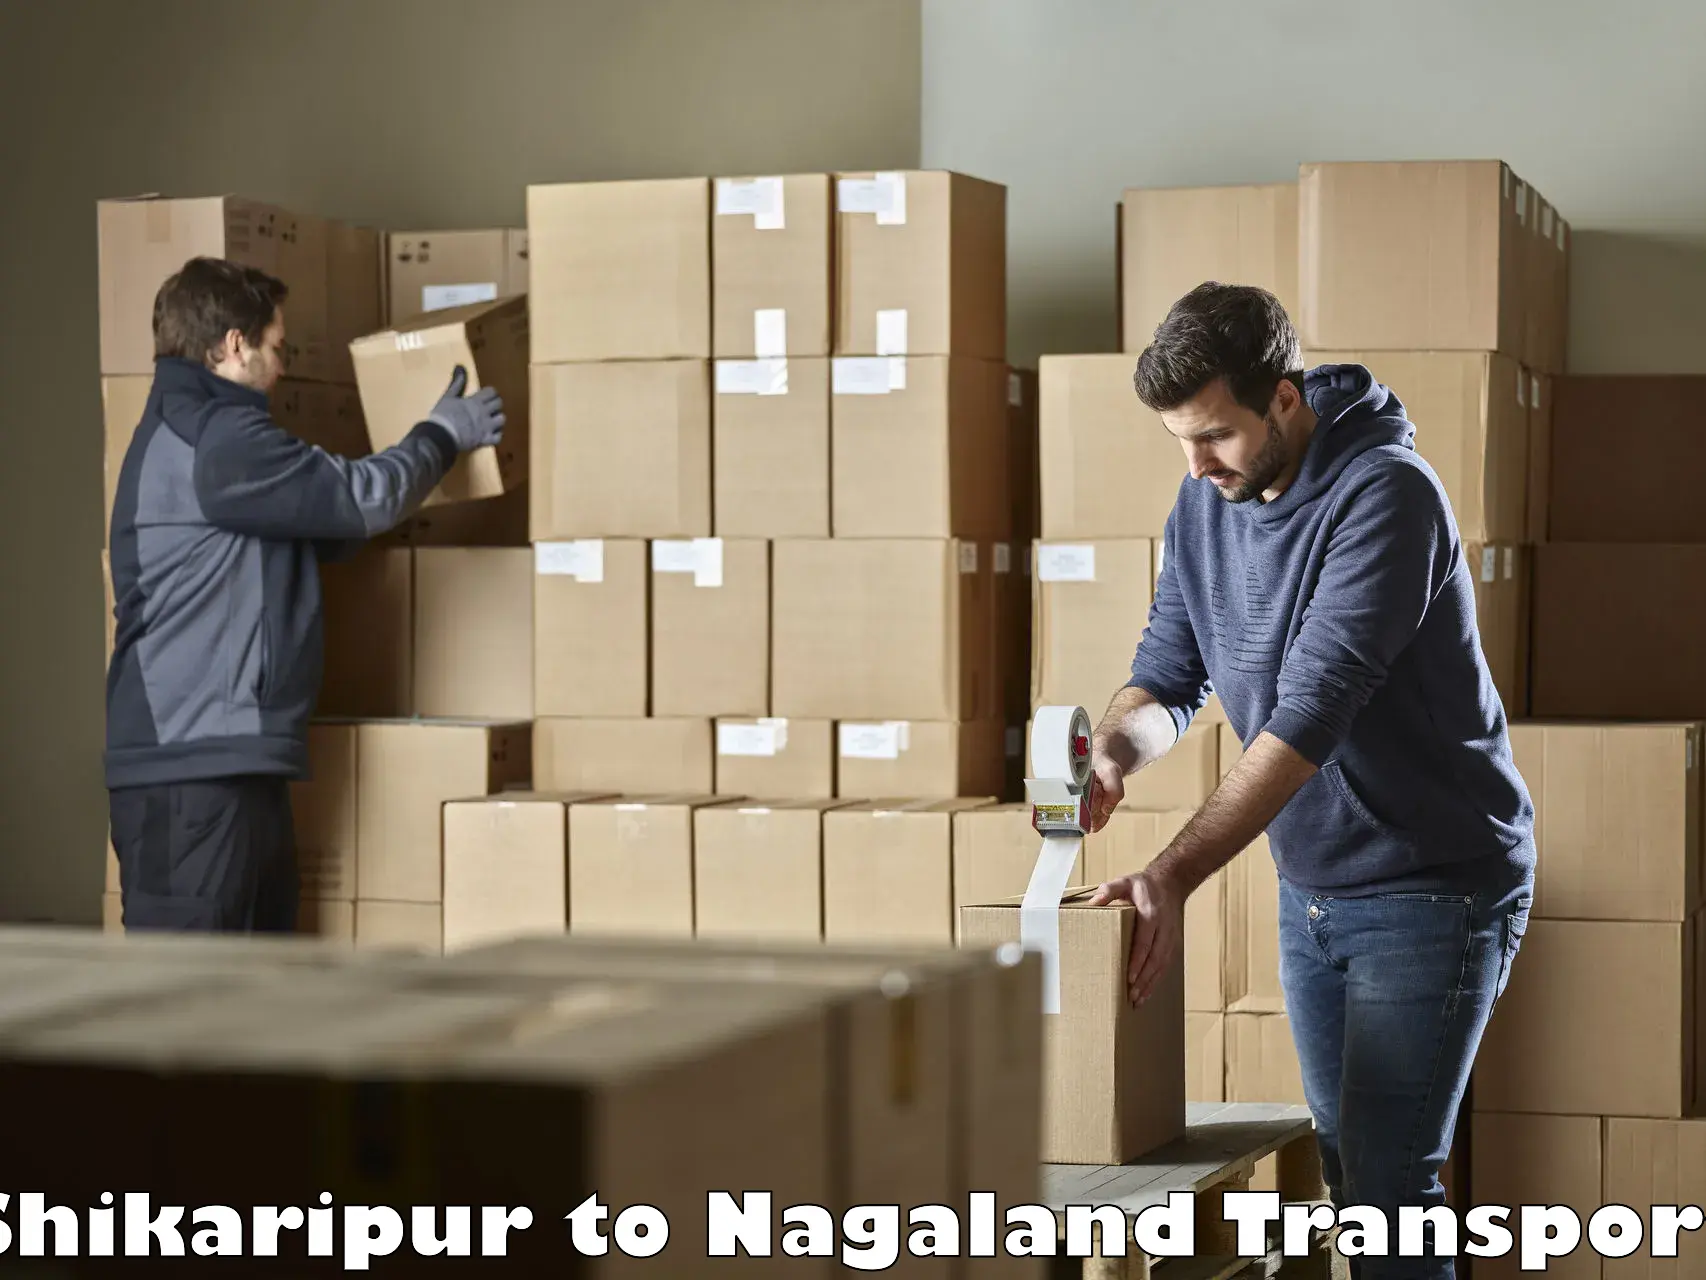 Container transport service Shikaripur to Nagaland